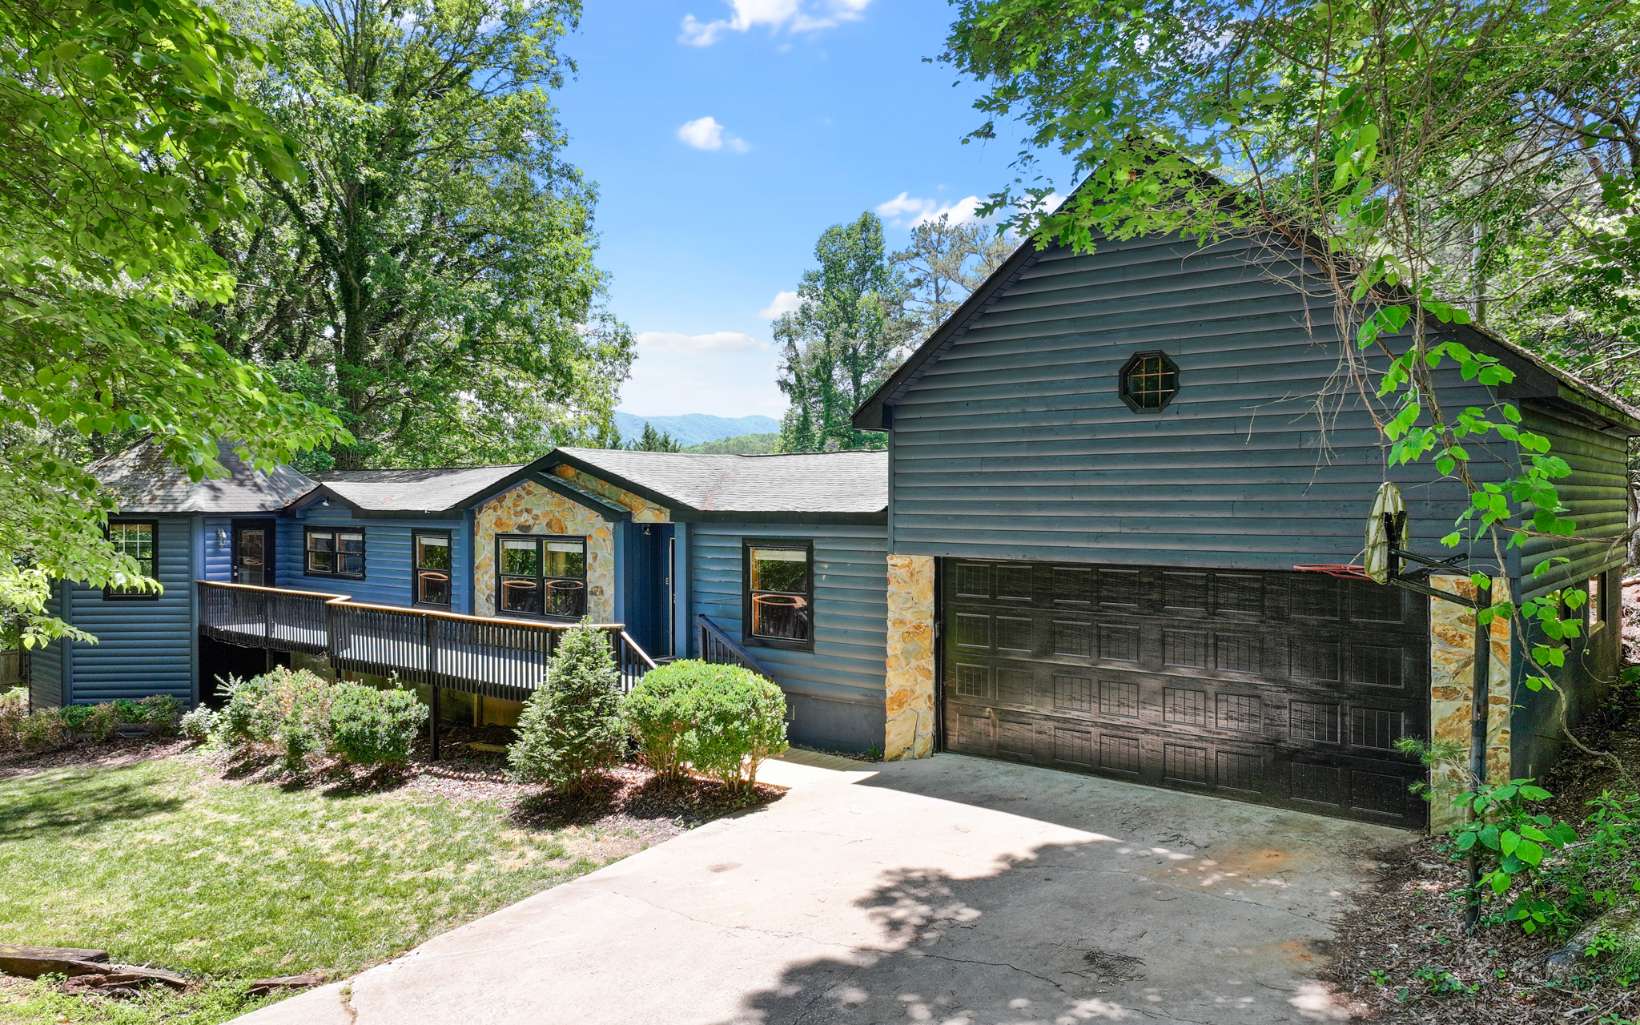 4 bedroom 2.5 baths, large livingroom, separate den with fireplace, master suite has sunroom and office, attached 2 car garage with a 638 sf unfinished loft. front deck overlooks Lake Blue Ridge. Great location less than 5 minutes to down town Blue Ridge and Lake Blue Ridge Marina.